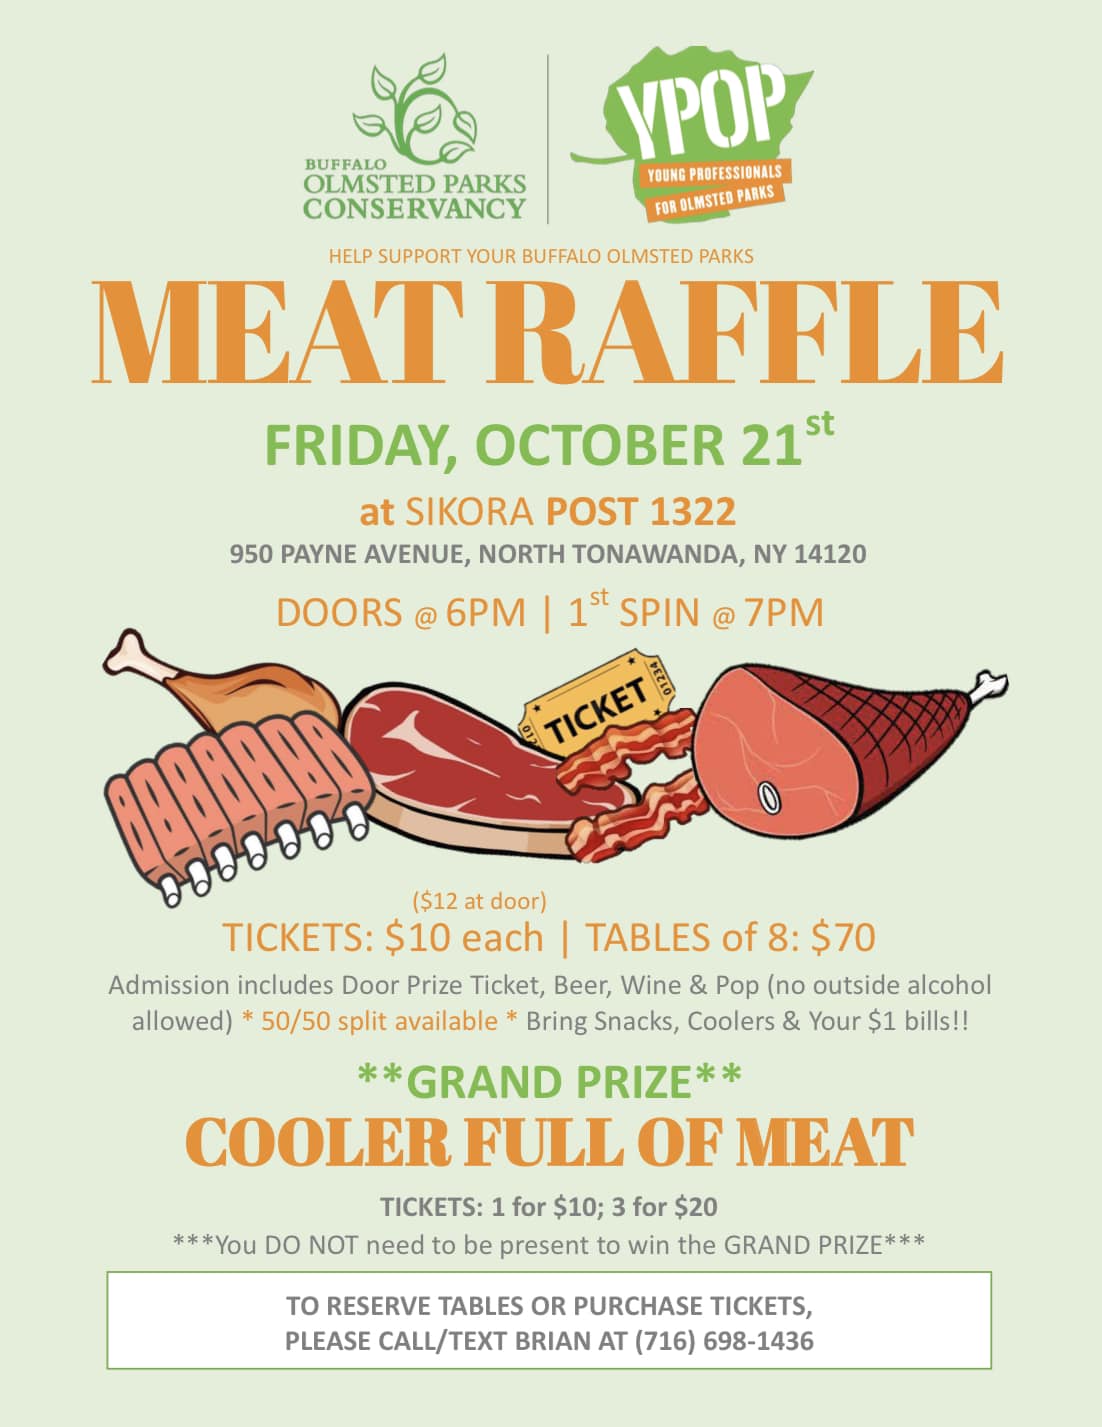 Meat Raffle on October 21, 2022